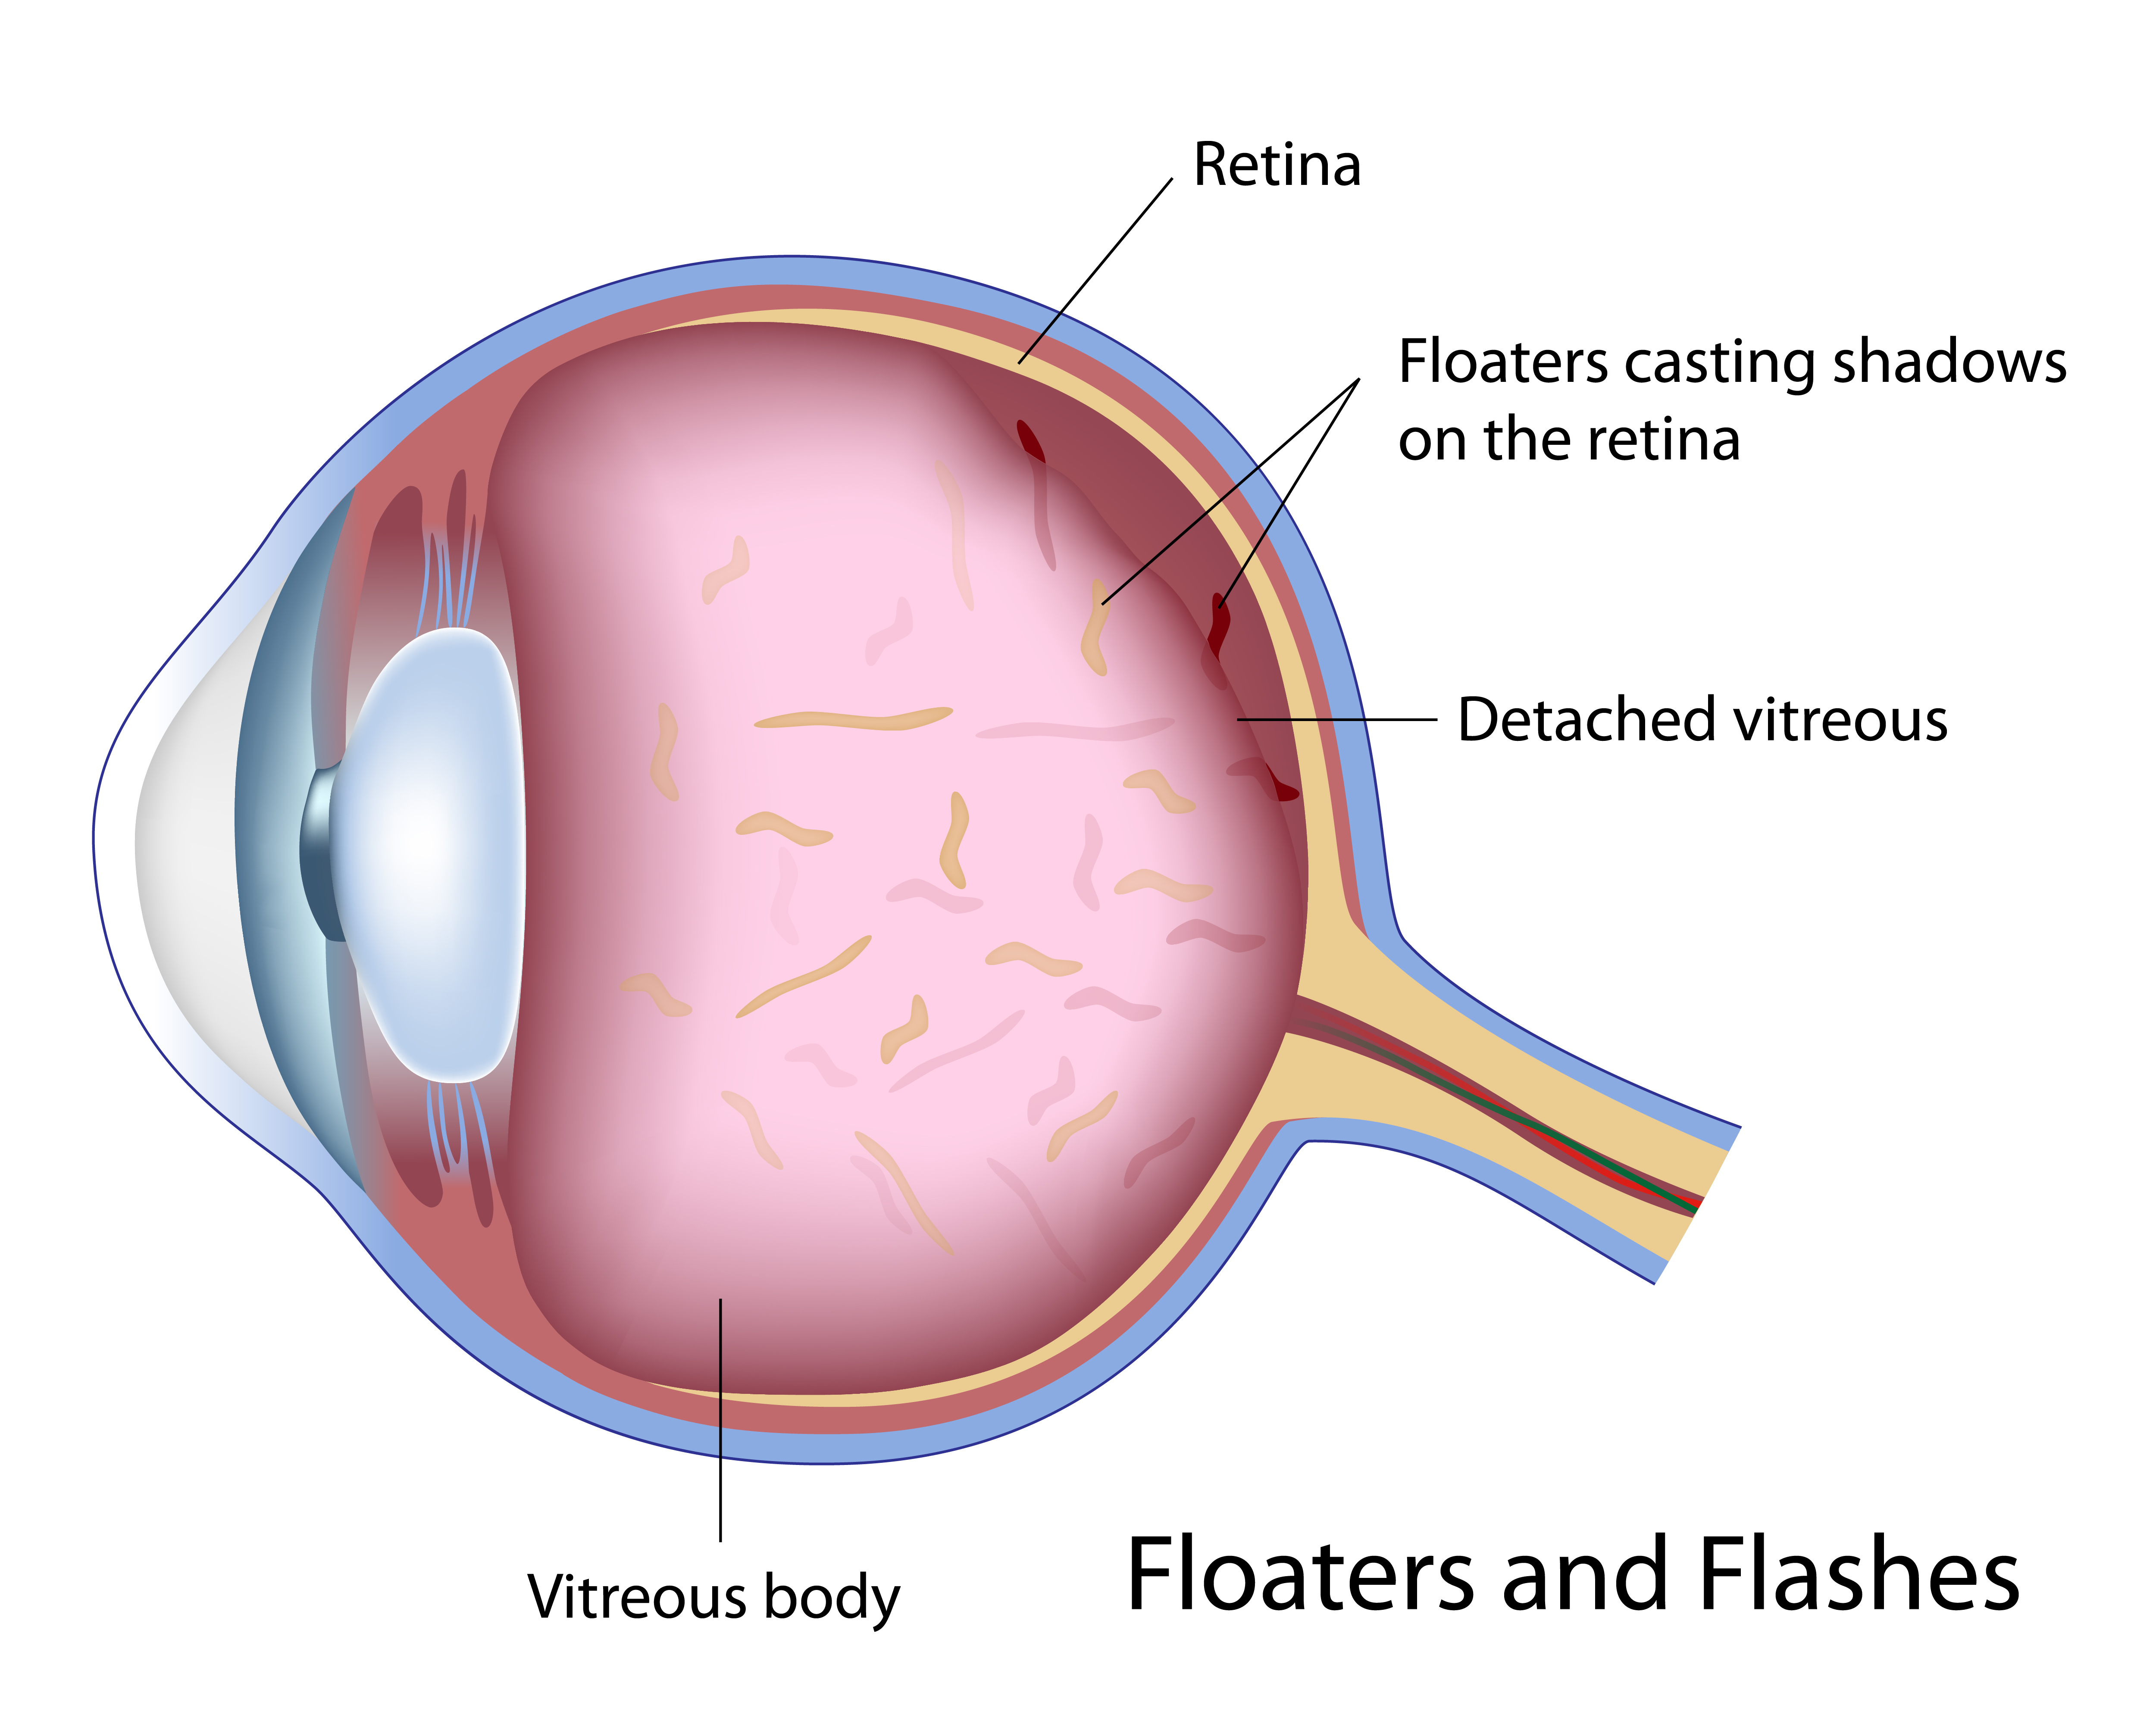 Eye floaters and flashes